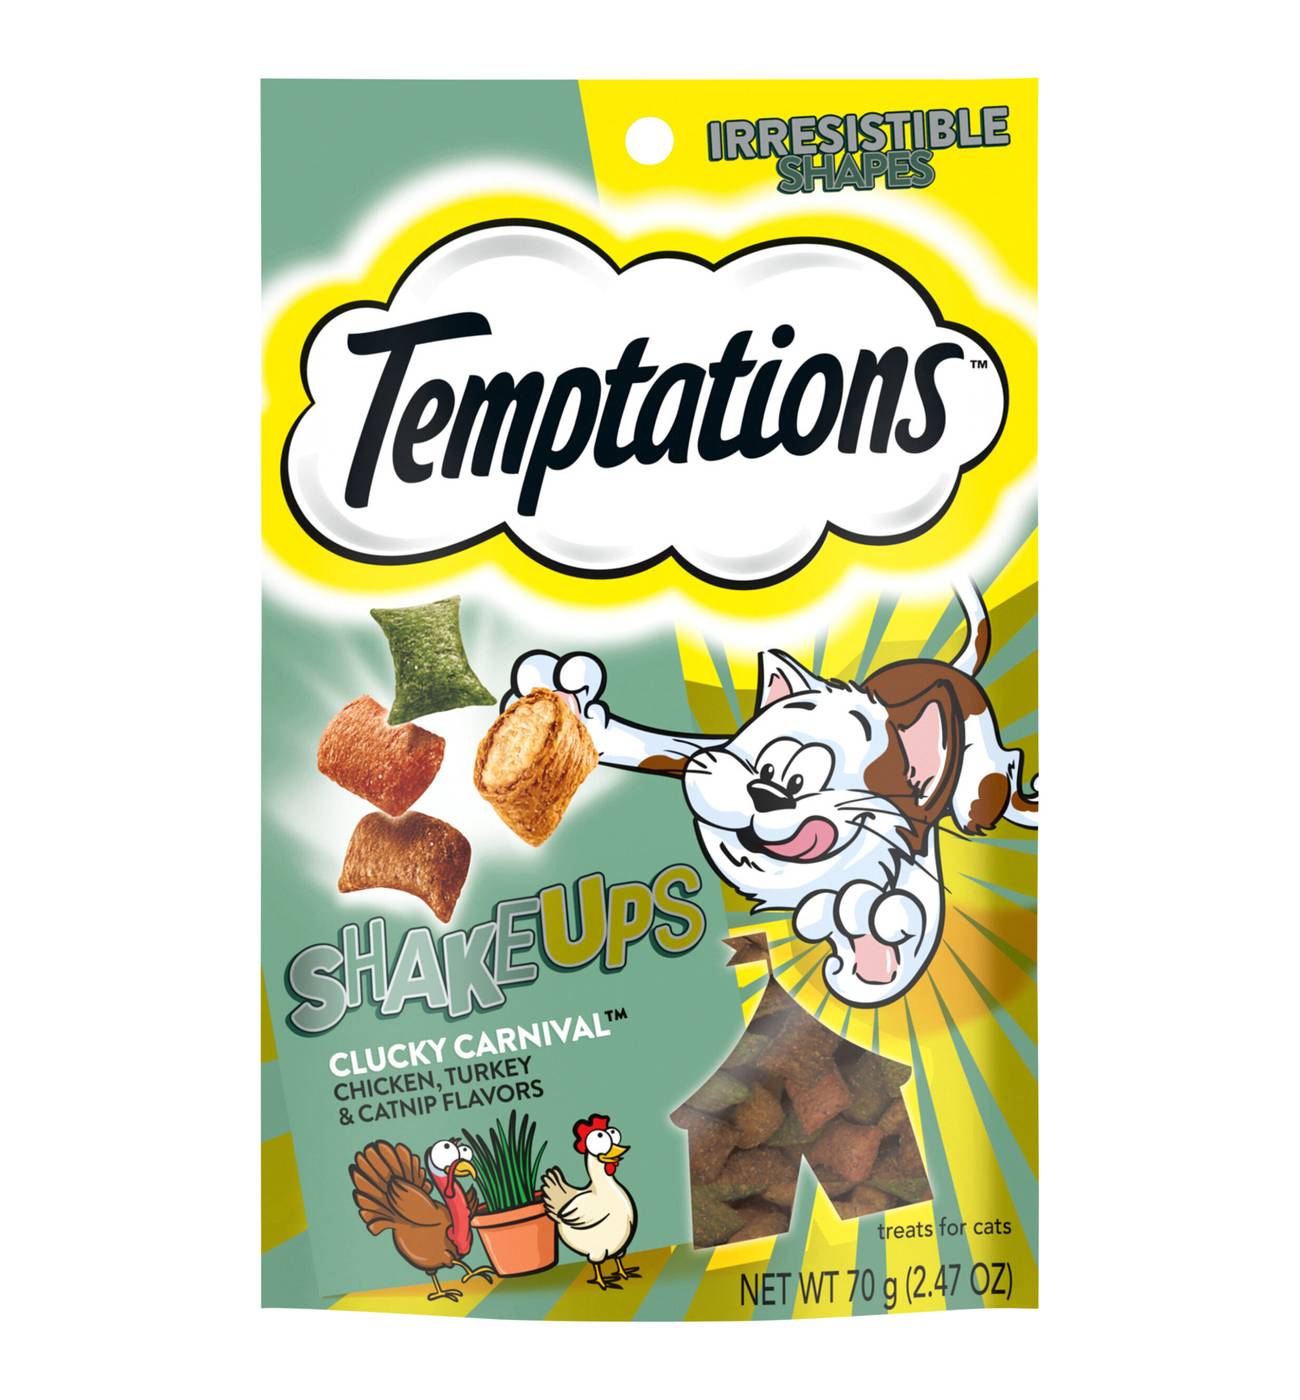 Temptations ShakeUps Crunchy and Soft Cat Treats Clucky Carnival Flavor; image 1 of 5